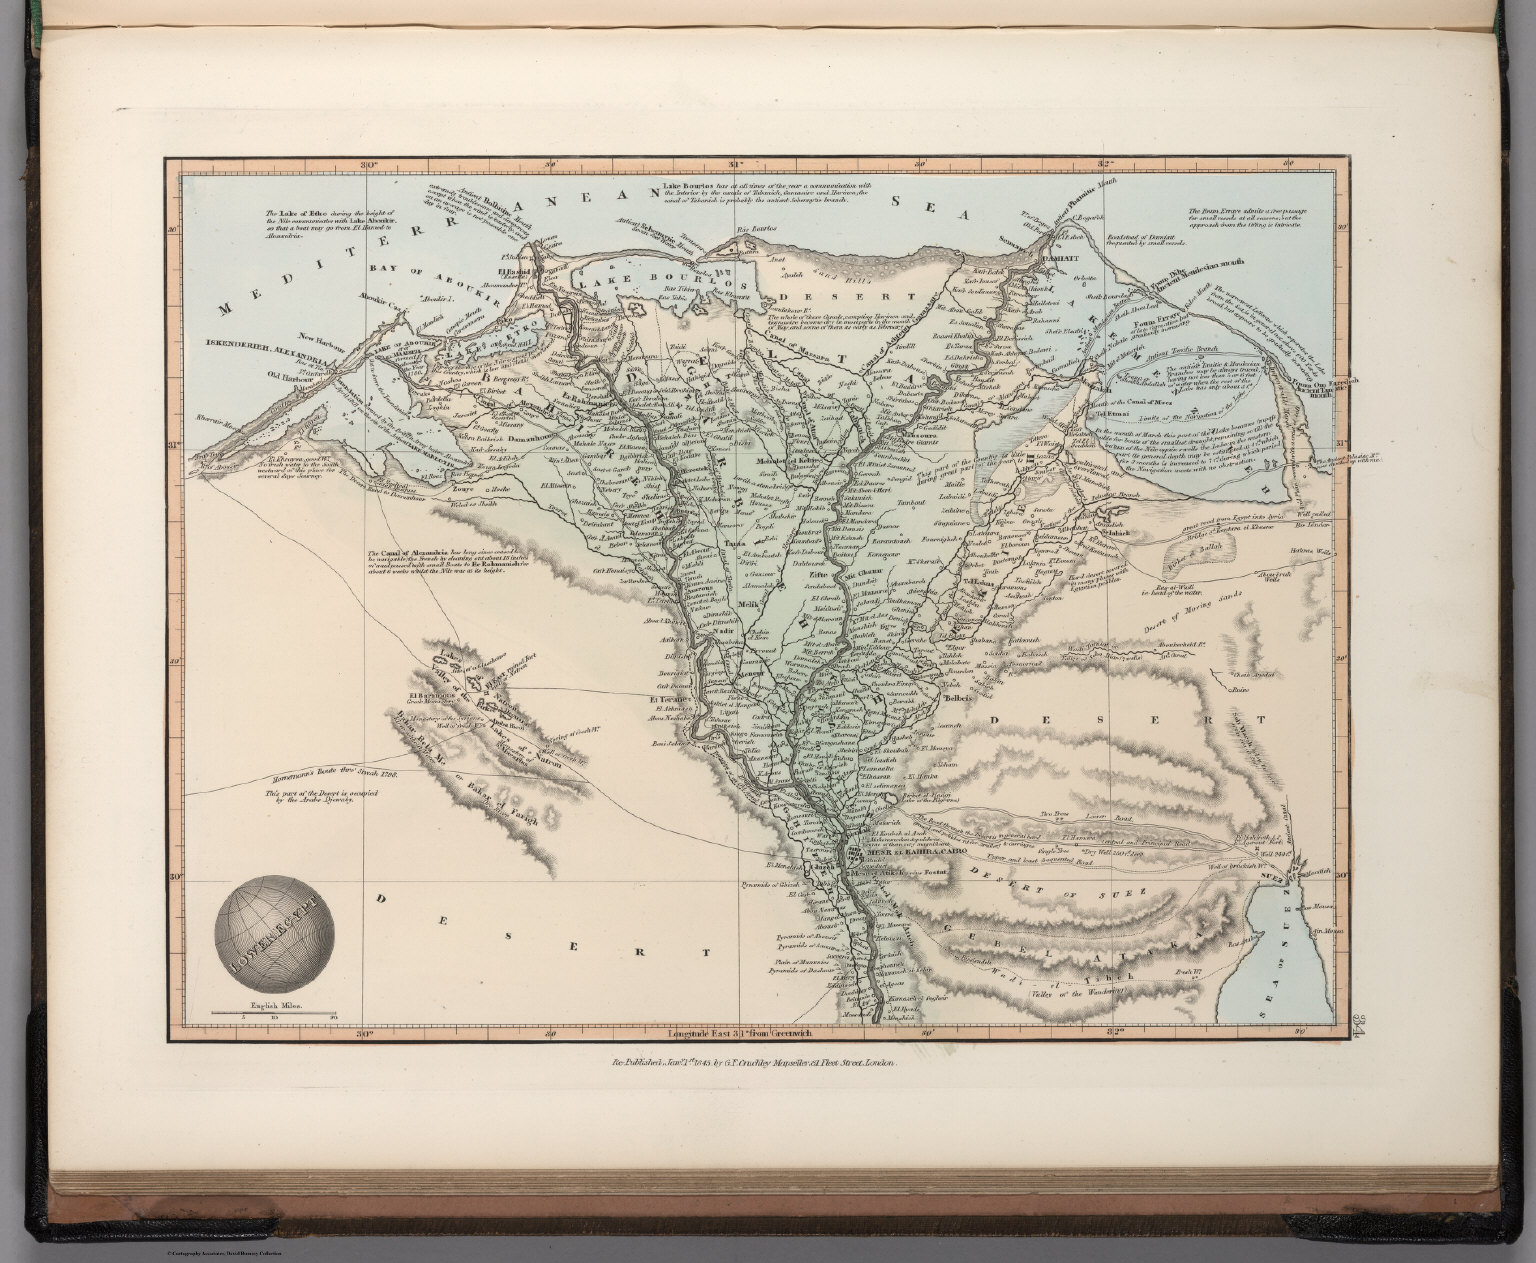 Lower Egypt. Re- Published, Jany st. 1845, by G.F. Cruchley, Mapseller, 81 Fleet Street, London. (to accompany) Outlines Of The World. By A. Arrowsmith, Hydrographer to His Majesty. 1850., Outlines Of The World. By A. Arrowsmith, Hydrographer to His Majesty. 1850. Published Jany st. 1847, by G.F. Cruchley, Mapseller, 81 Fleet Street, London. Addition to 1850. (title page portrait) Aaron Arrowsmith Esquire. H.W. Pickersgill A.R.A. Pinxt. T.A. Dean Sculpt., Lower Egypt